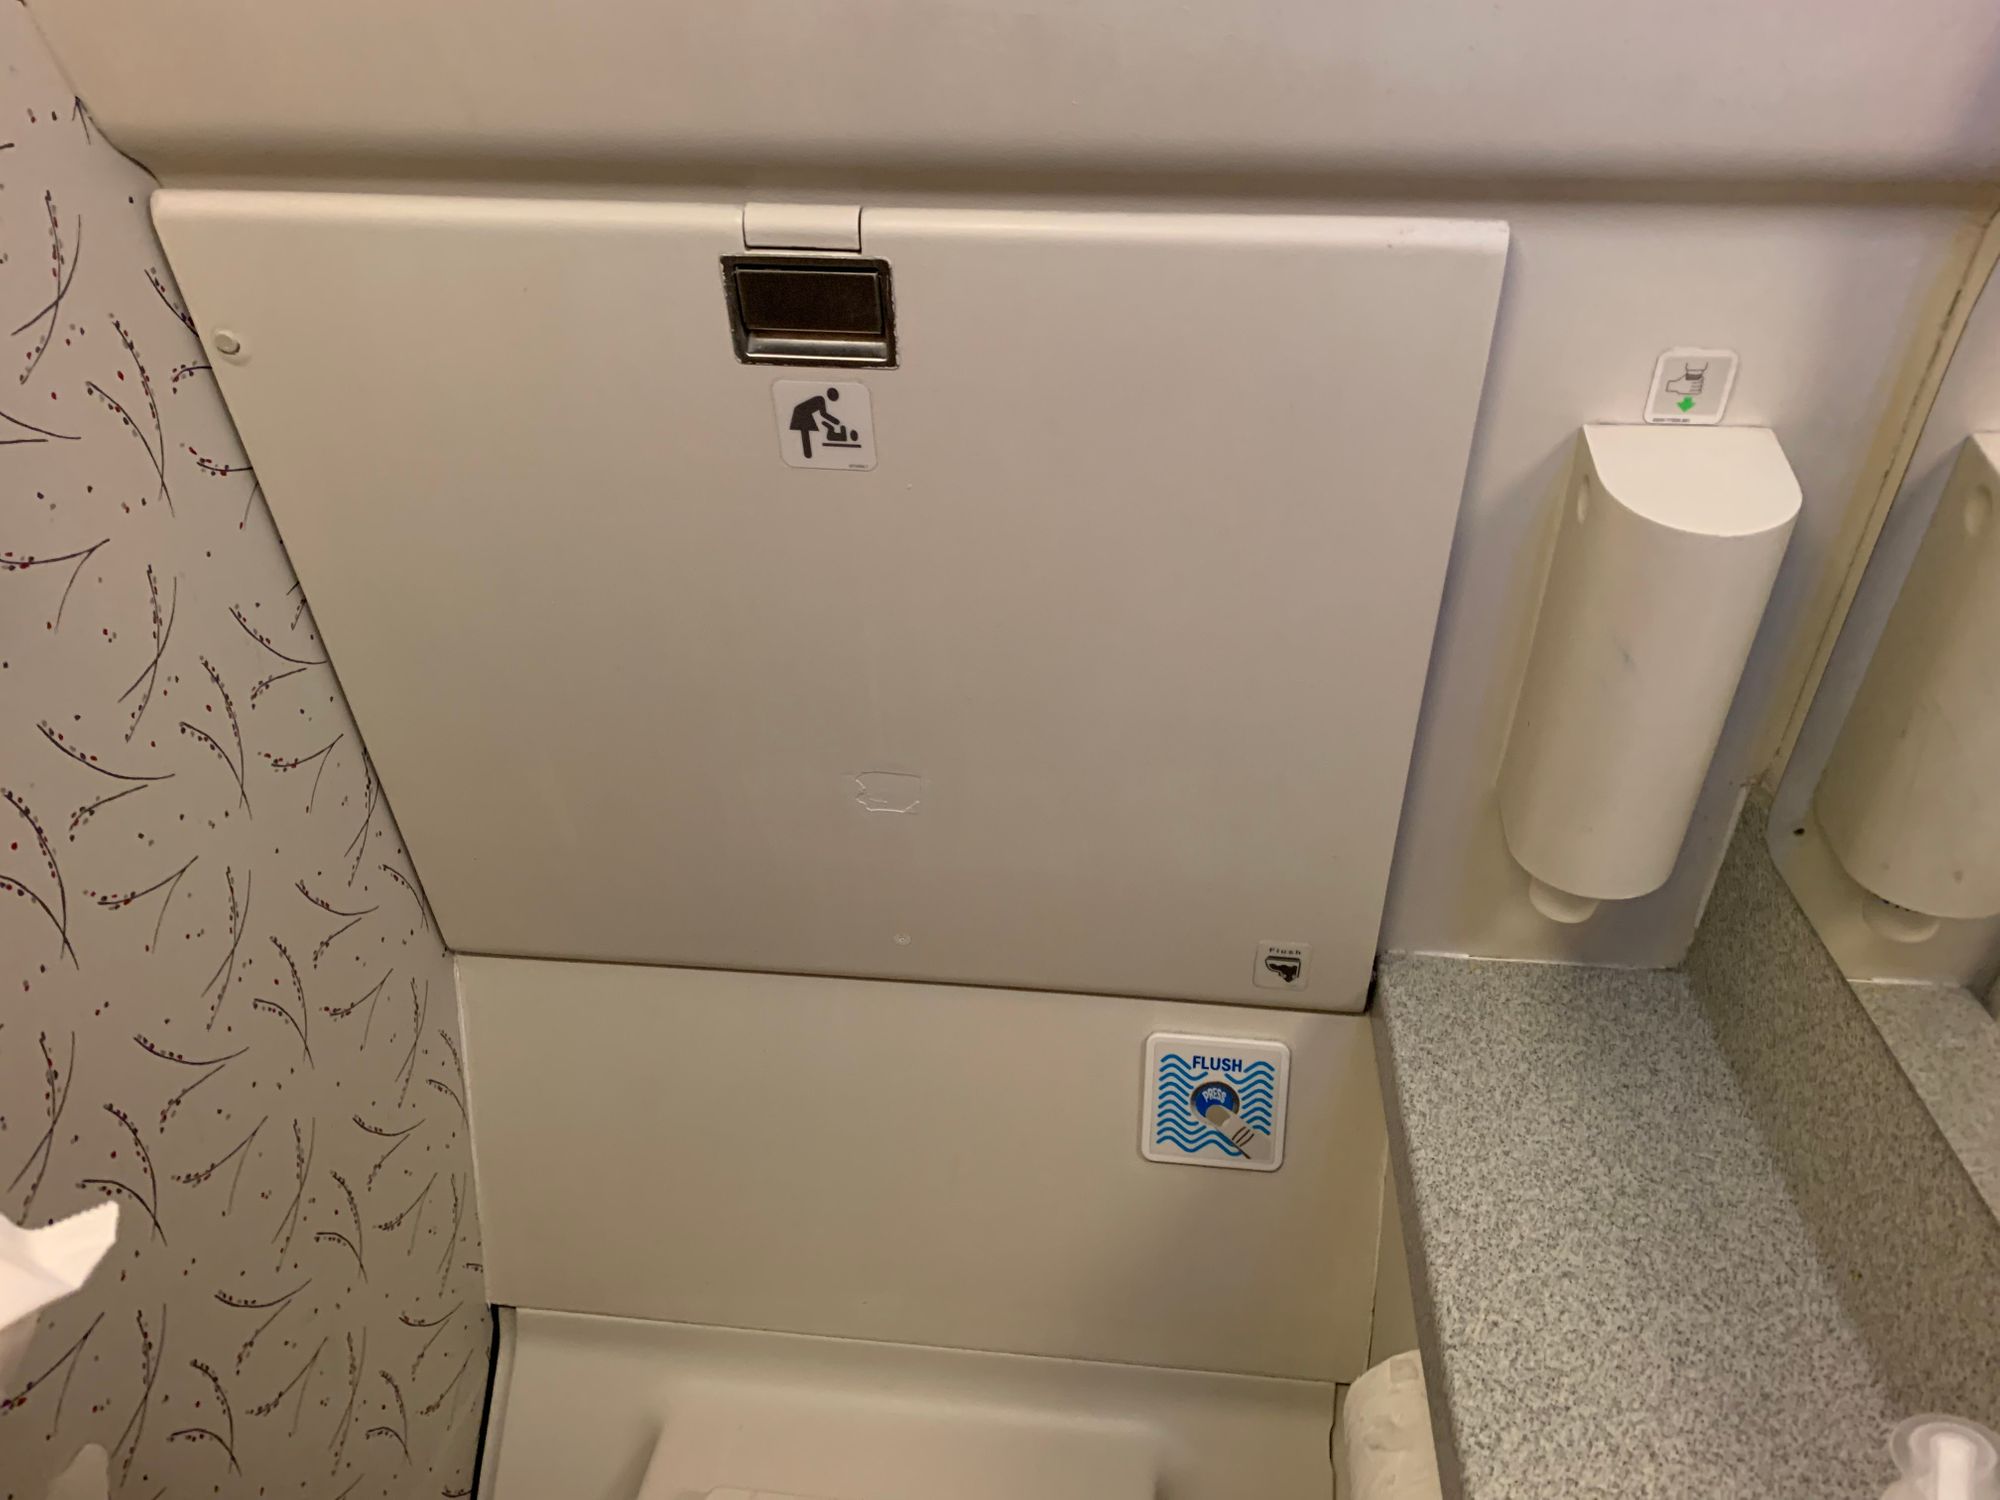 Diaper Or Nappy In An Airplane Bathroom, Airplane Bathroom Changing Table